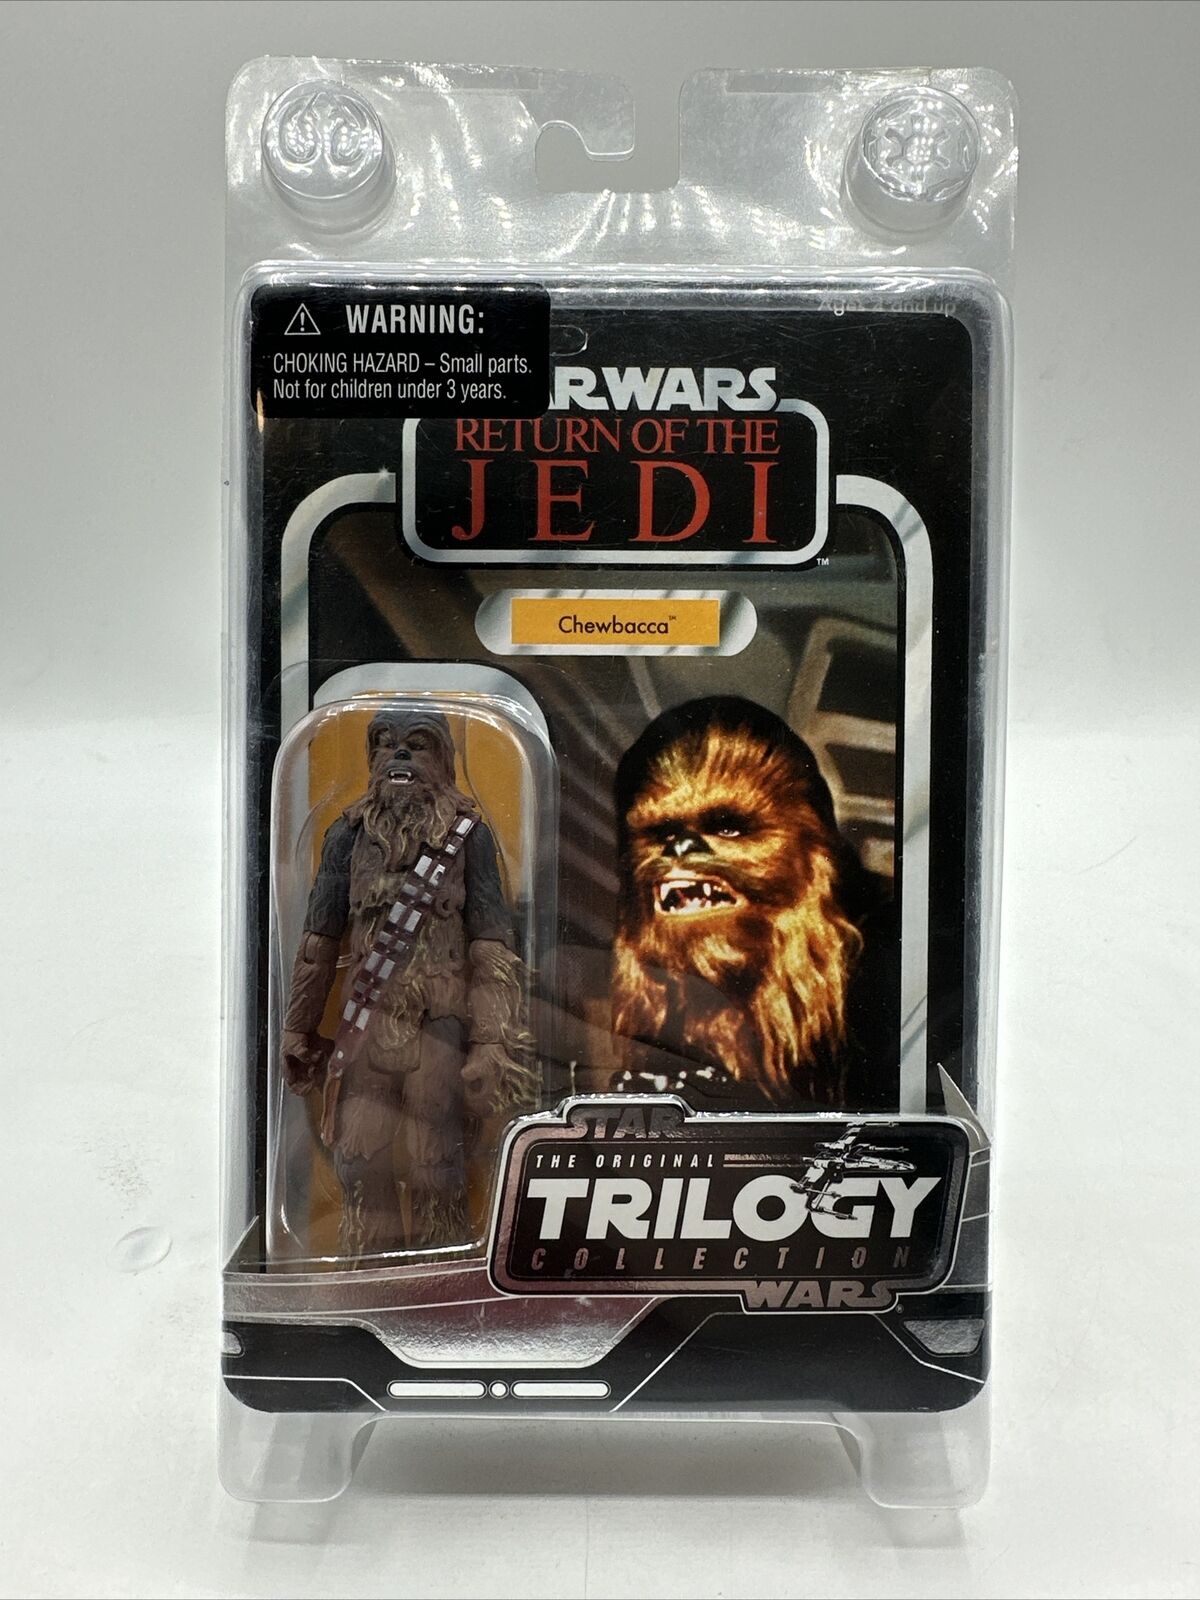 2004 Hasbro Star Wars The Original Trilogy Collection ROTJ Chewbacca Figure